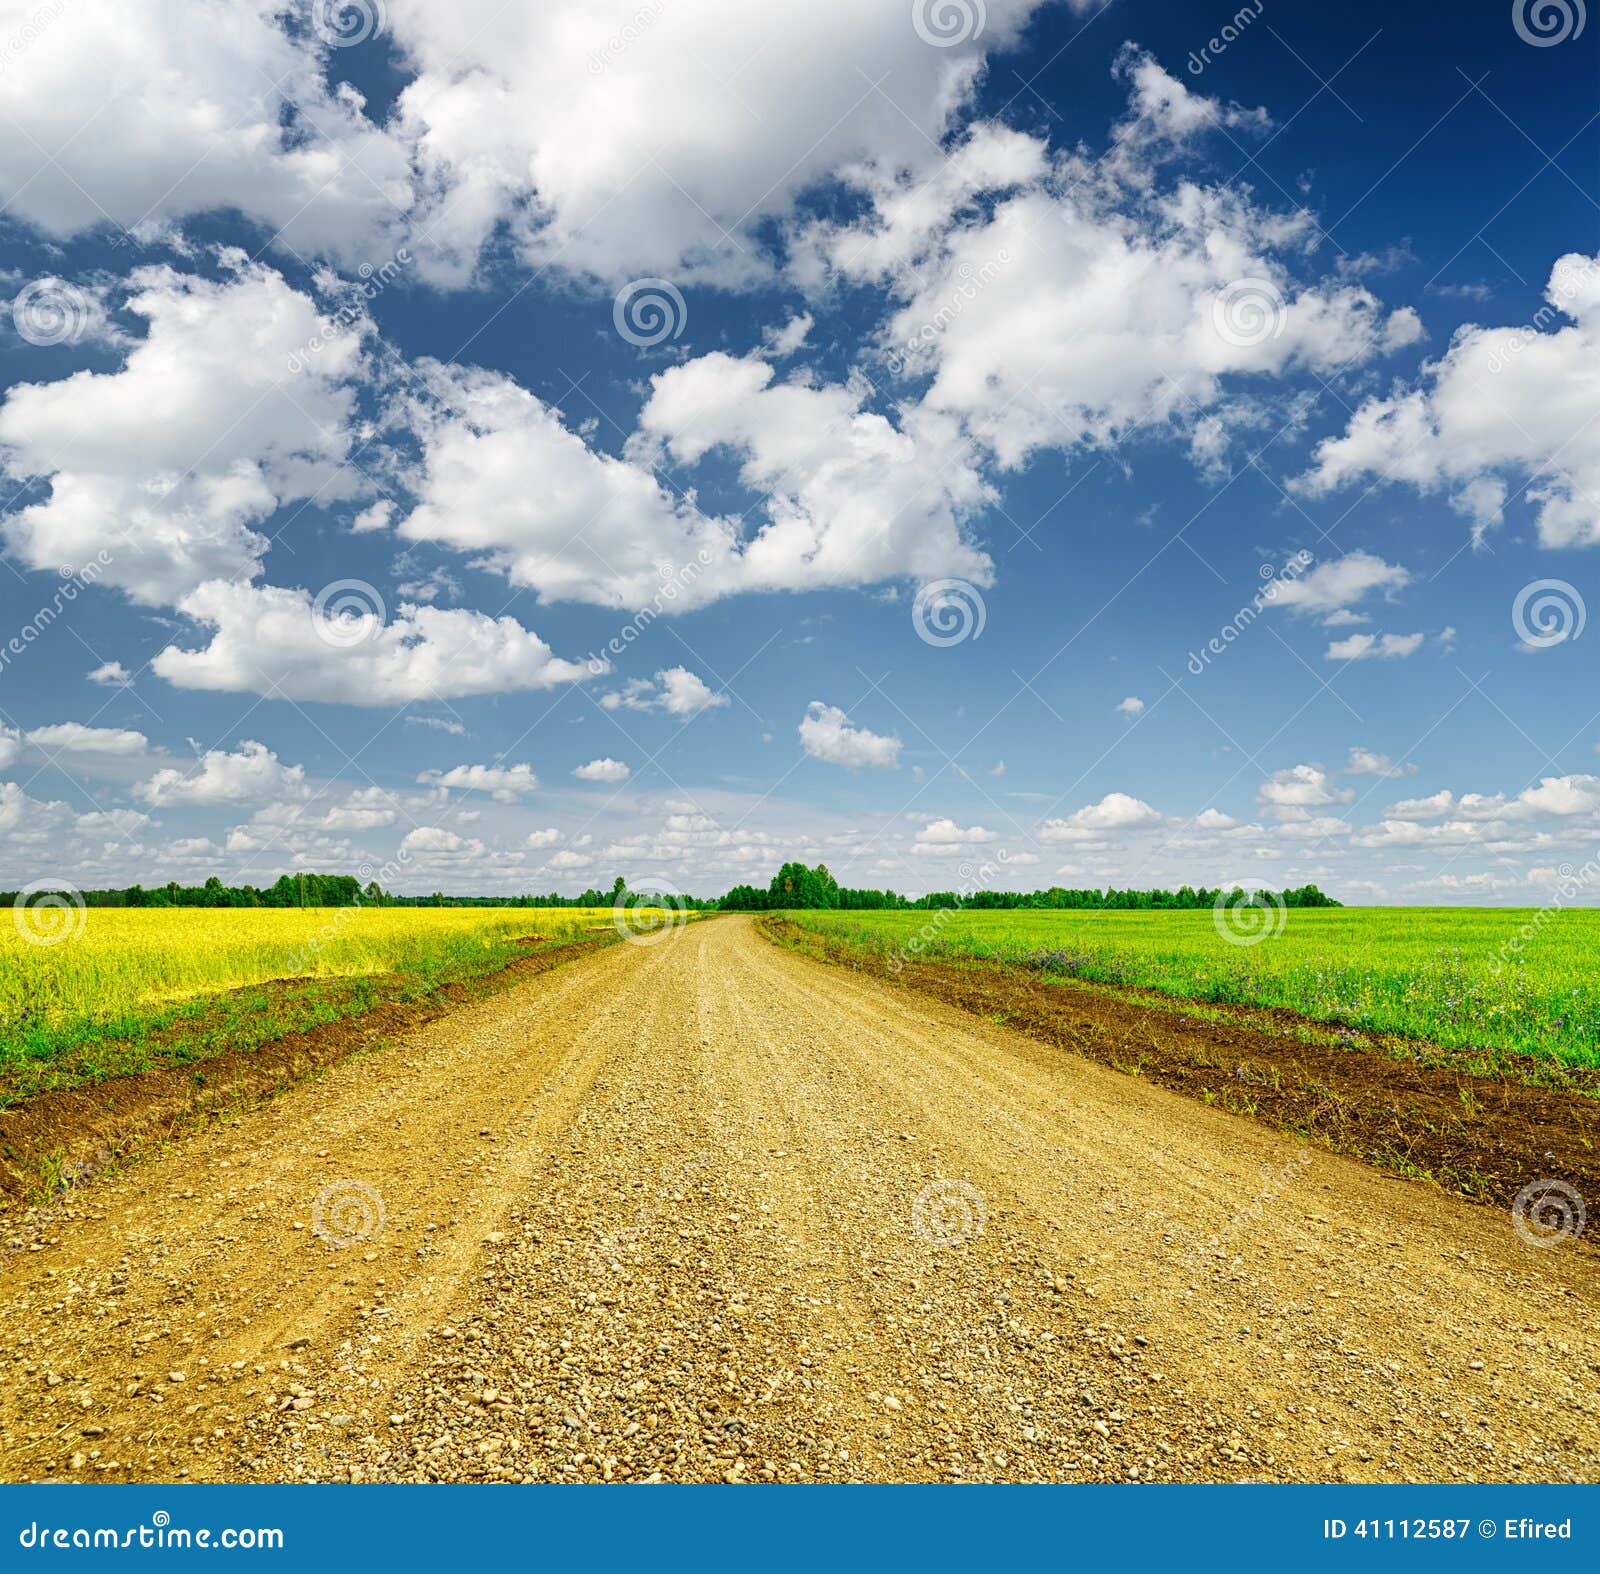 Blue Sky And Ground Road Stock Image Image Of Land Environment 41112587